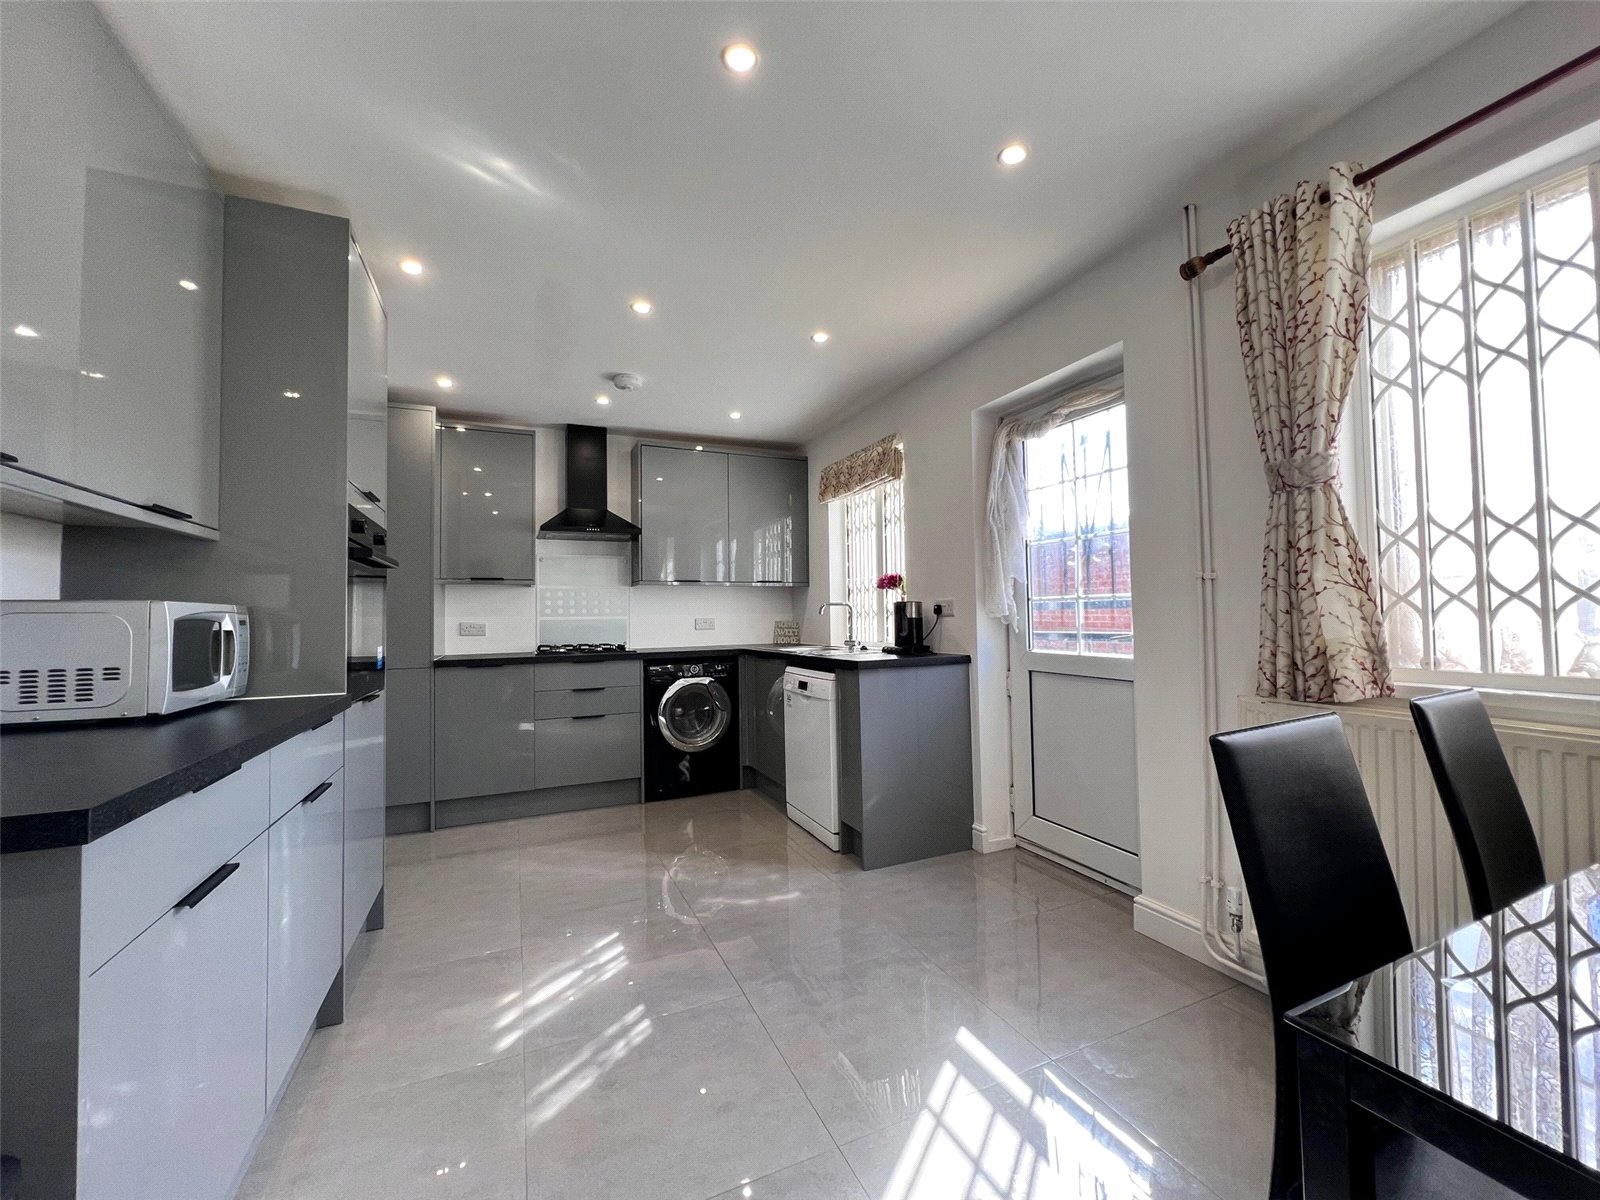 4 bed house to rent in Fordham Road, New Barnet - Property Image 1